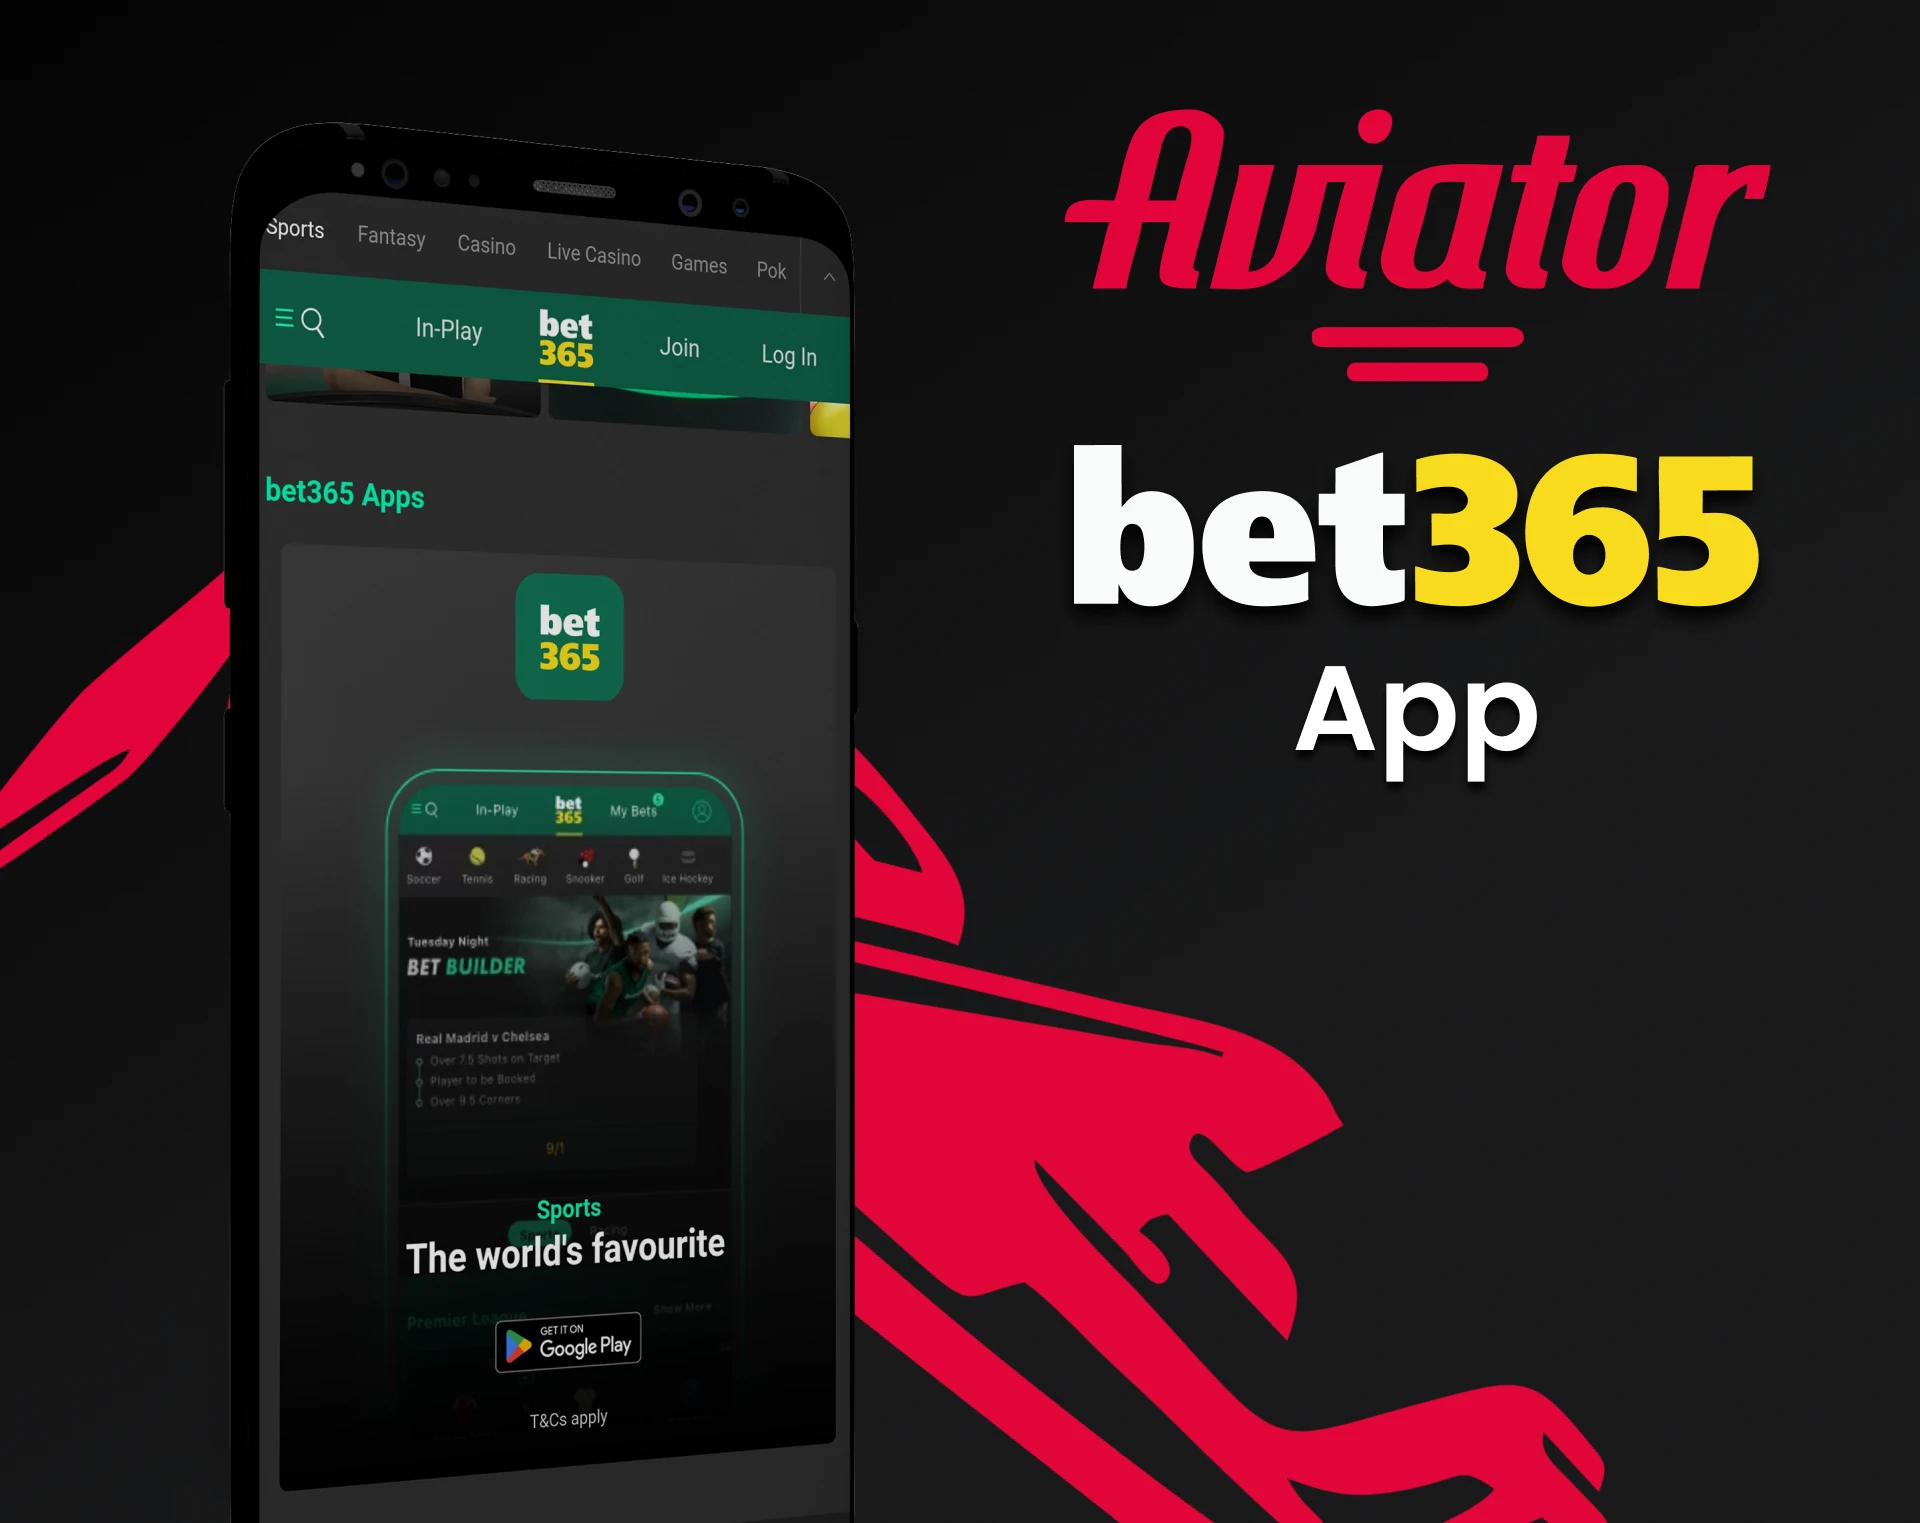 To play Aviator you can use the Bet365 application.